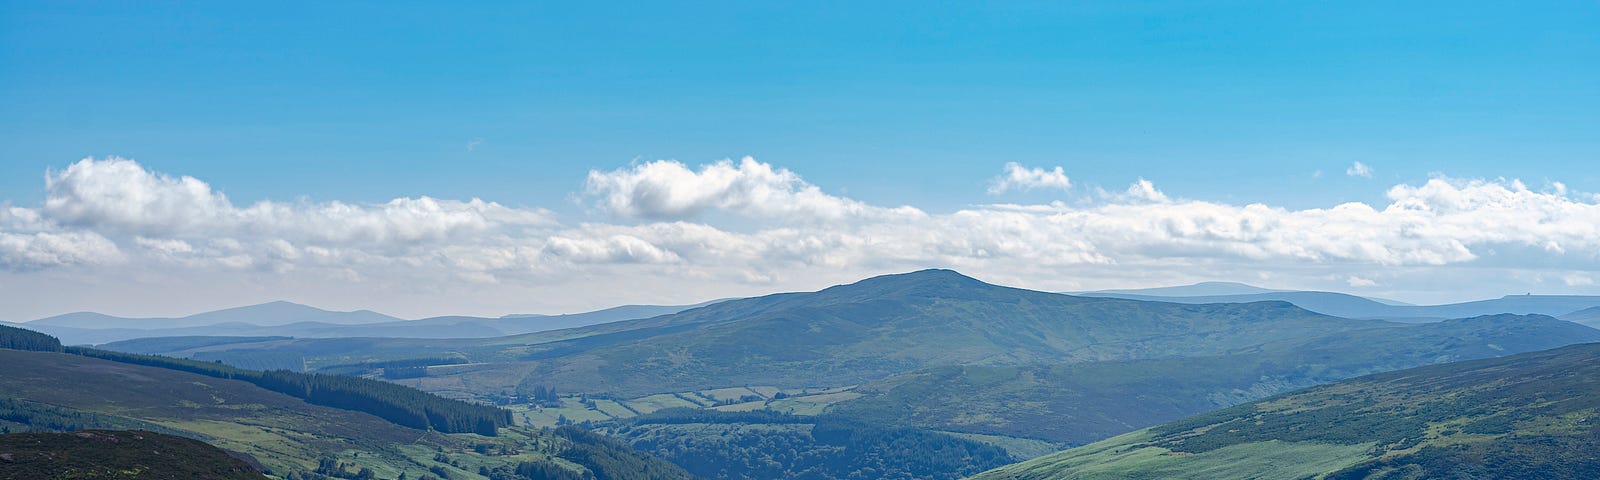 A mountain range in Ireland under a blue sky showing a small road